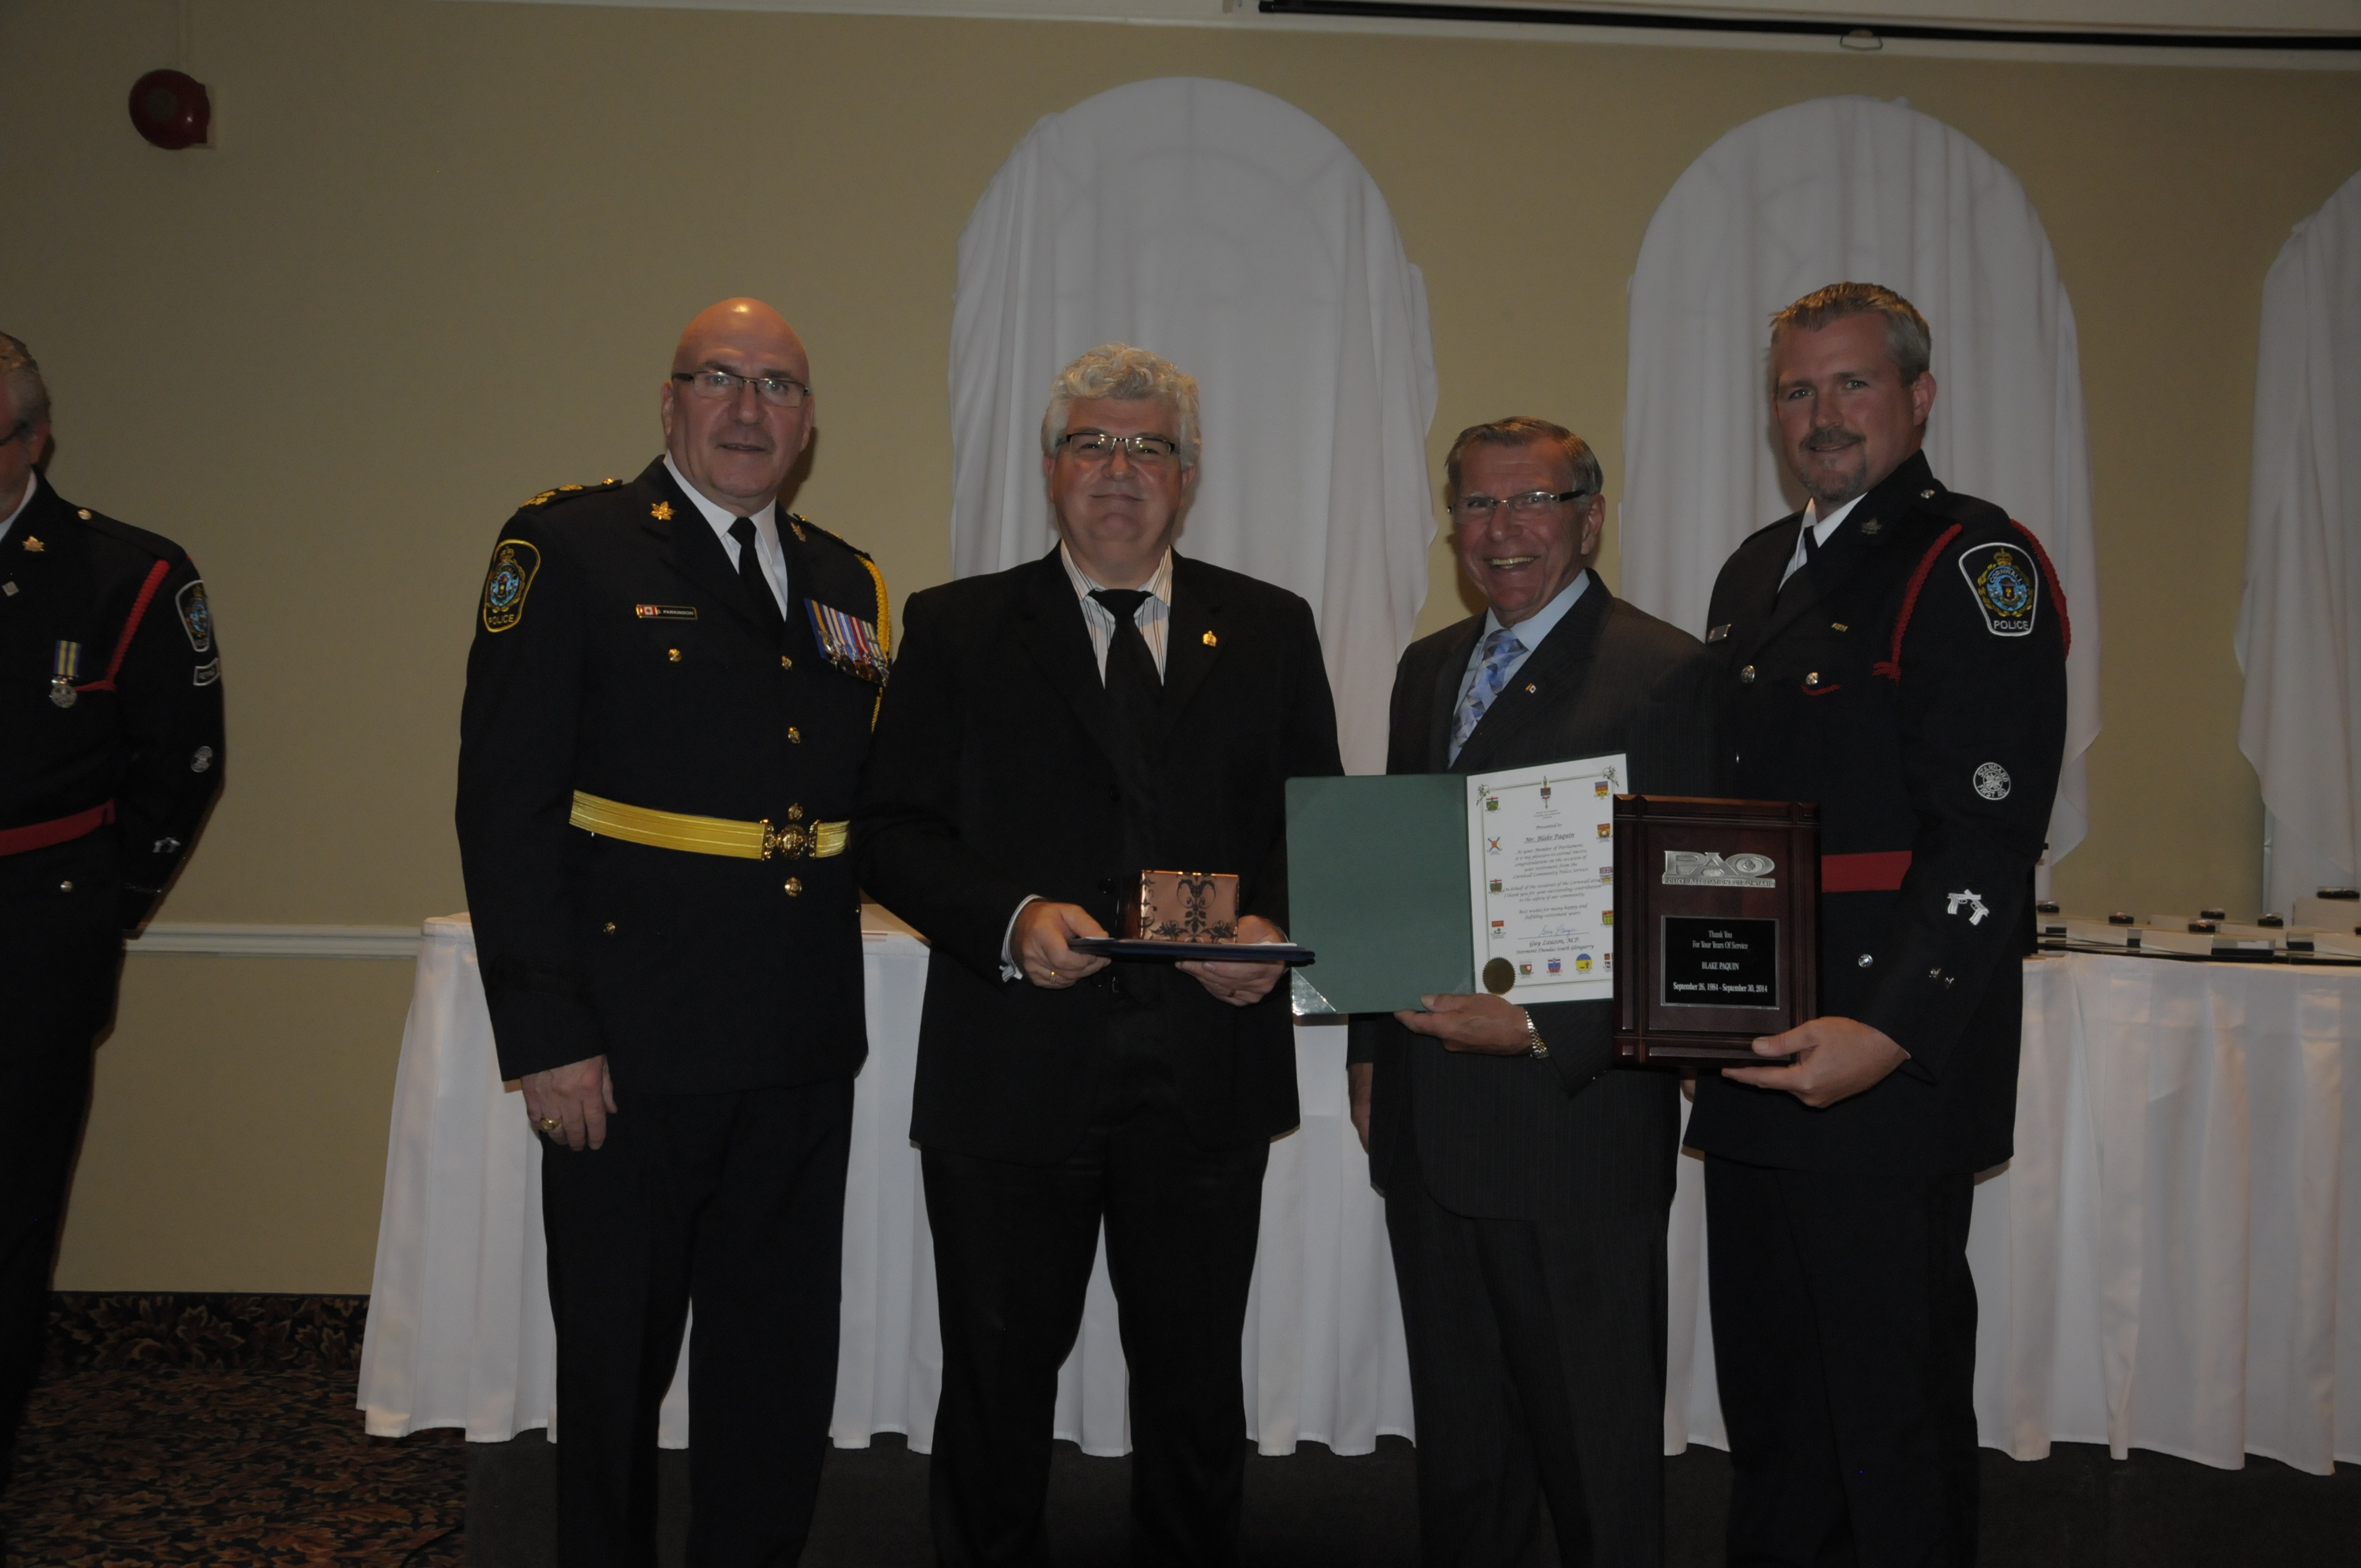 Pictured (from left) are Chief Dan Parkinson, Blake Paquin (Ret.), MP Guy Lauzon, CPA President Dave MacLean. (Cornwall Newswatch)